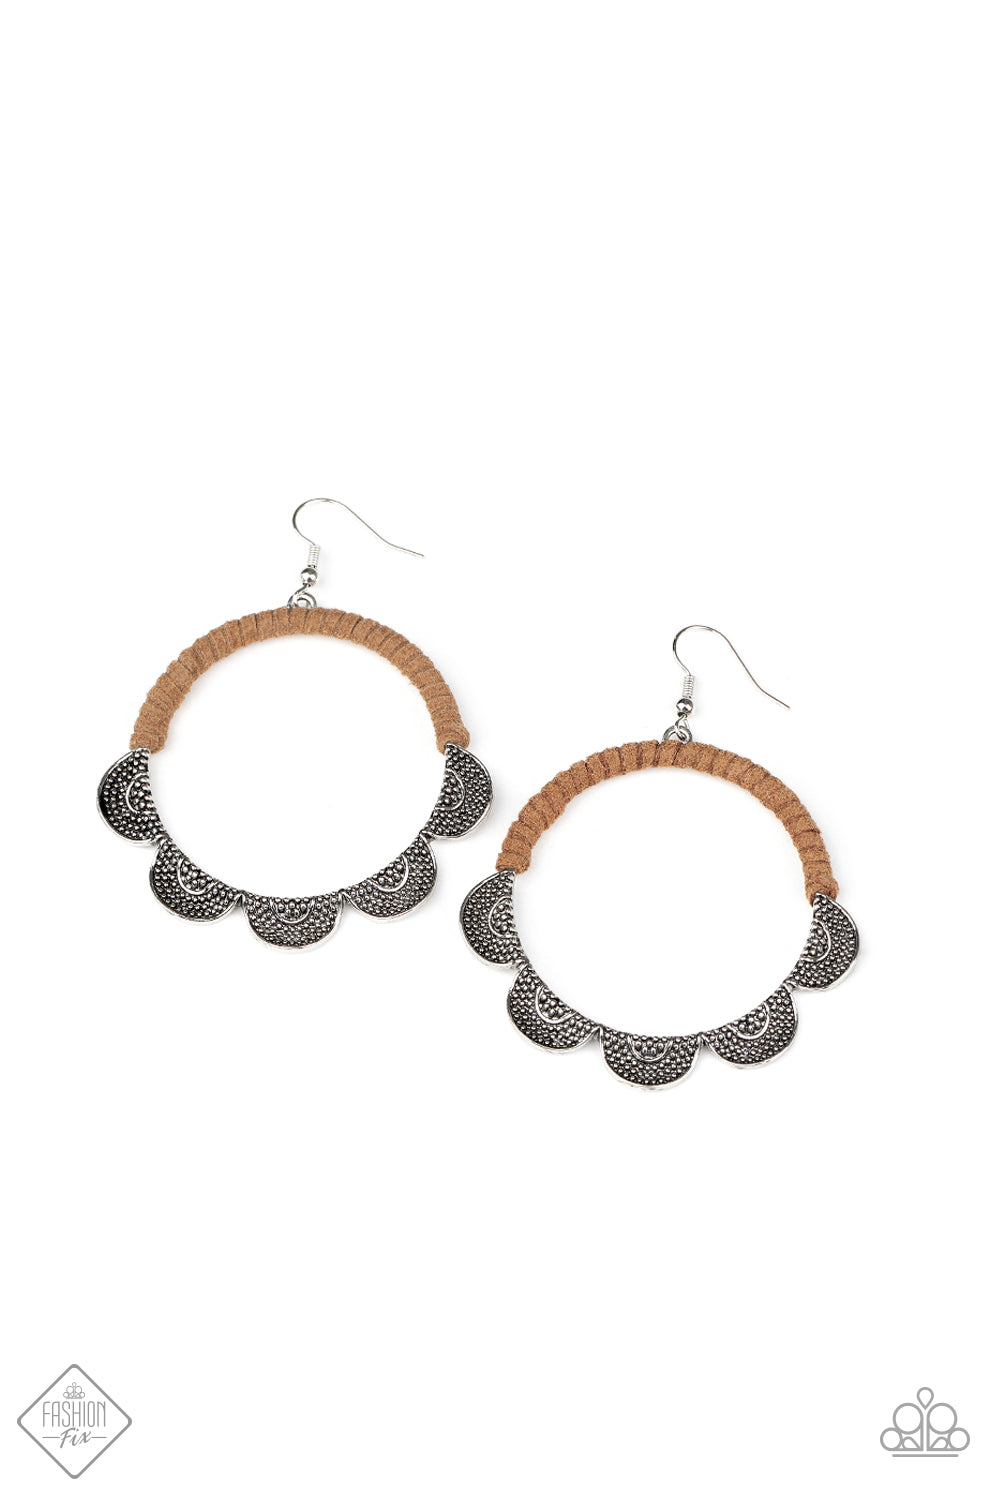 TAMBOURINE TREND - BROWN LEATHER SUEDE WRAPPED SILVER SCALLOPED FASHION FIX HOOP EARRINGS